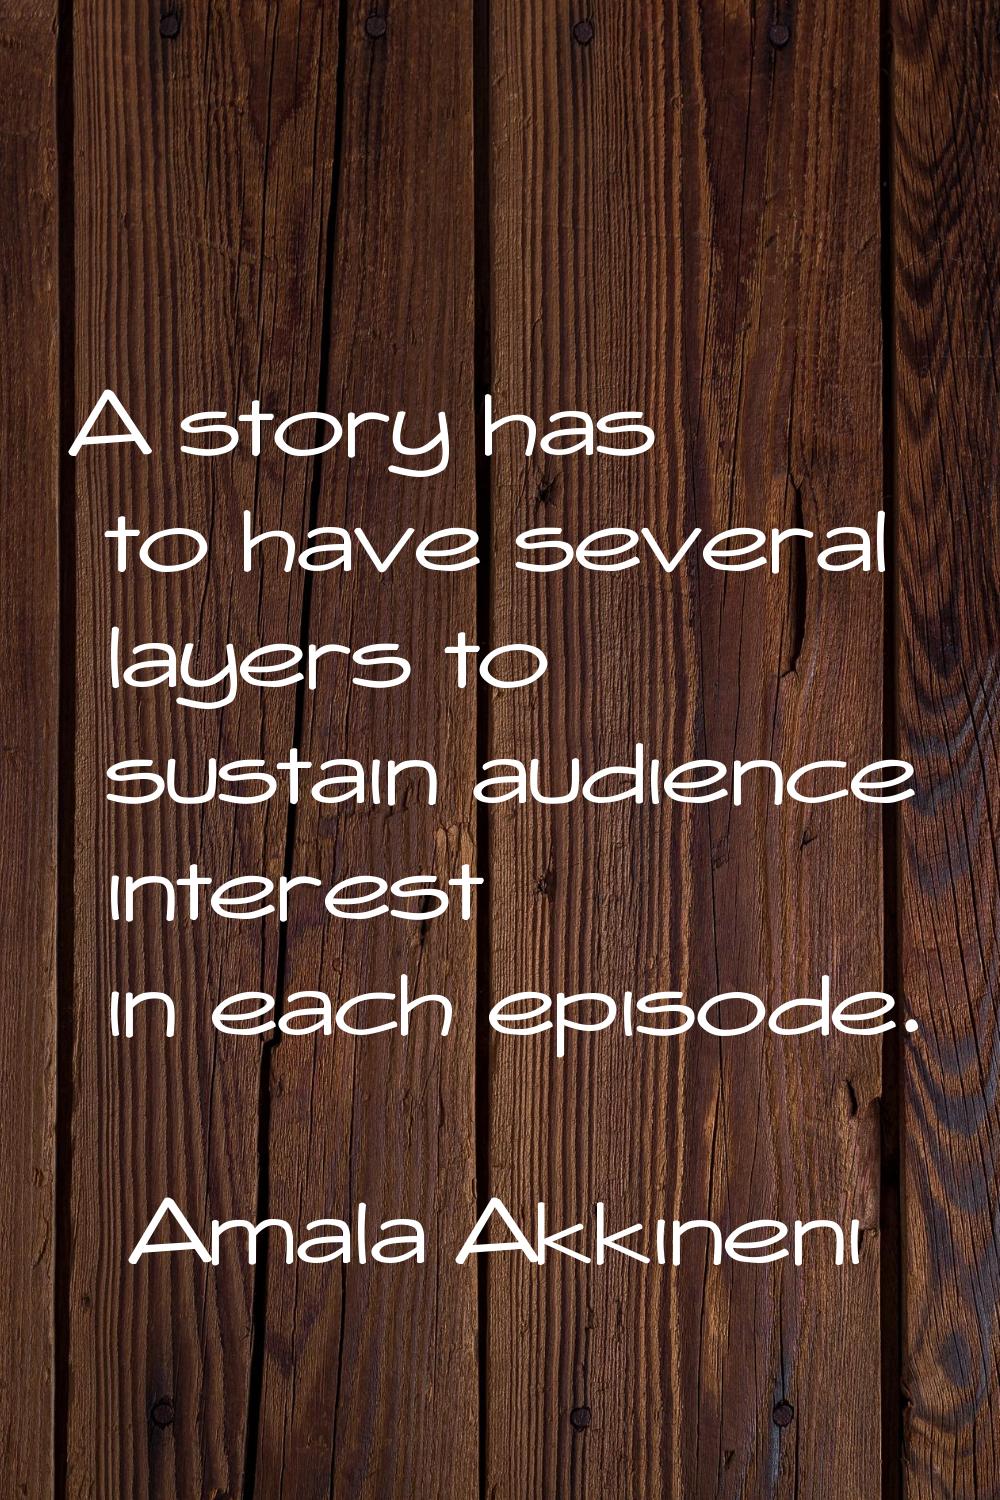 A story has to have several layers to sustain audience interest in each episode.